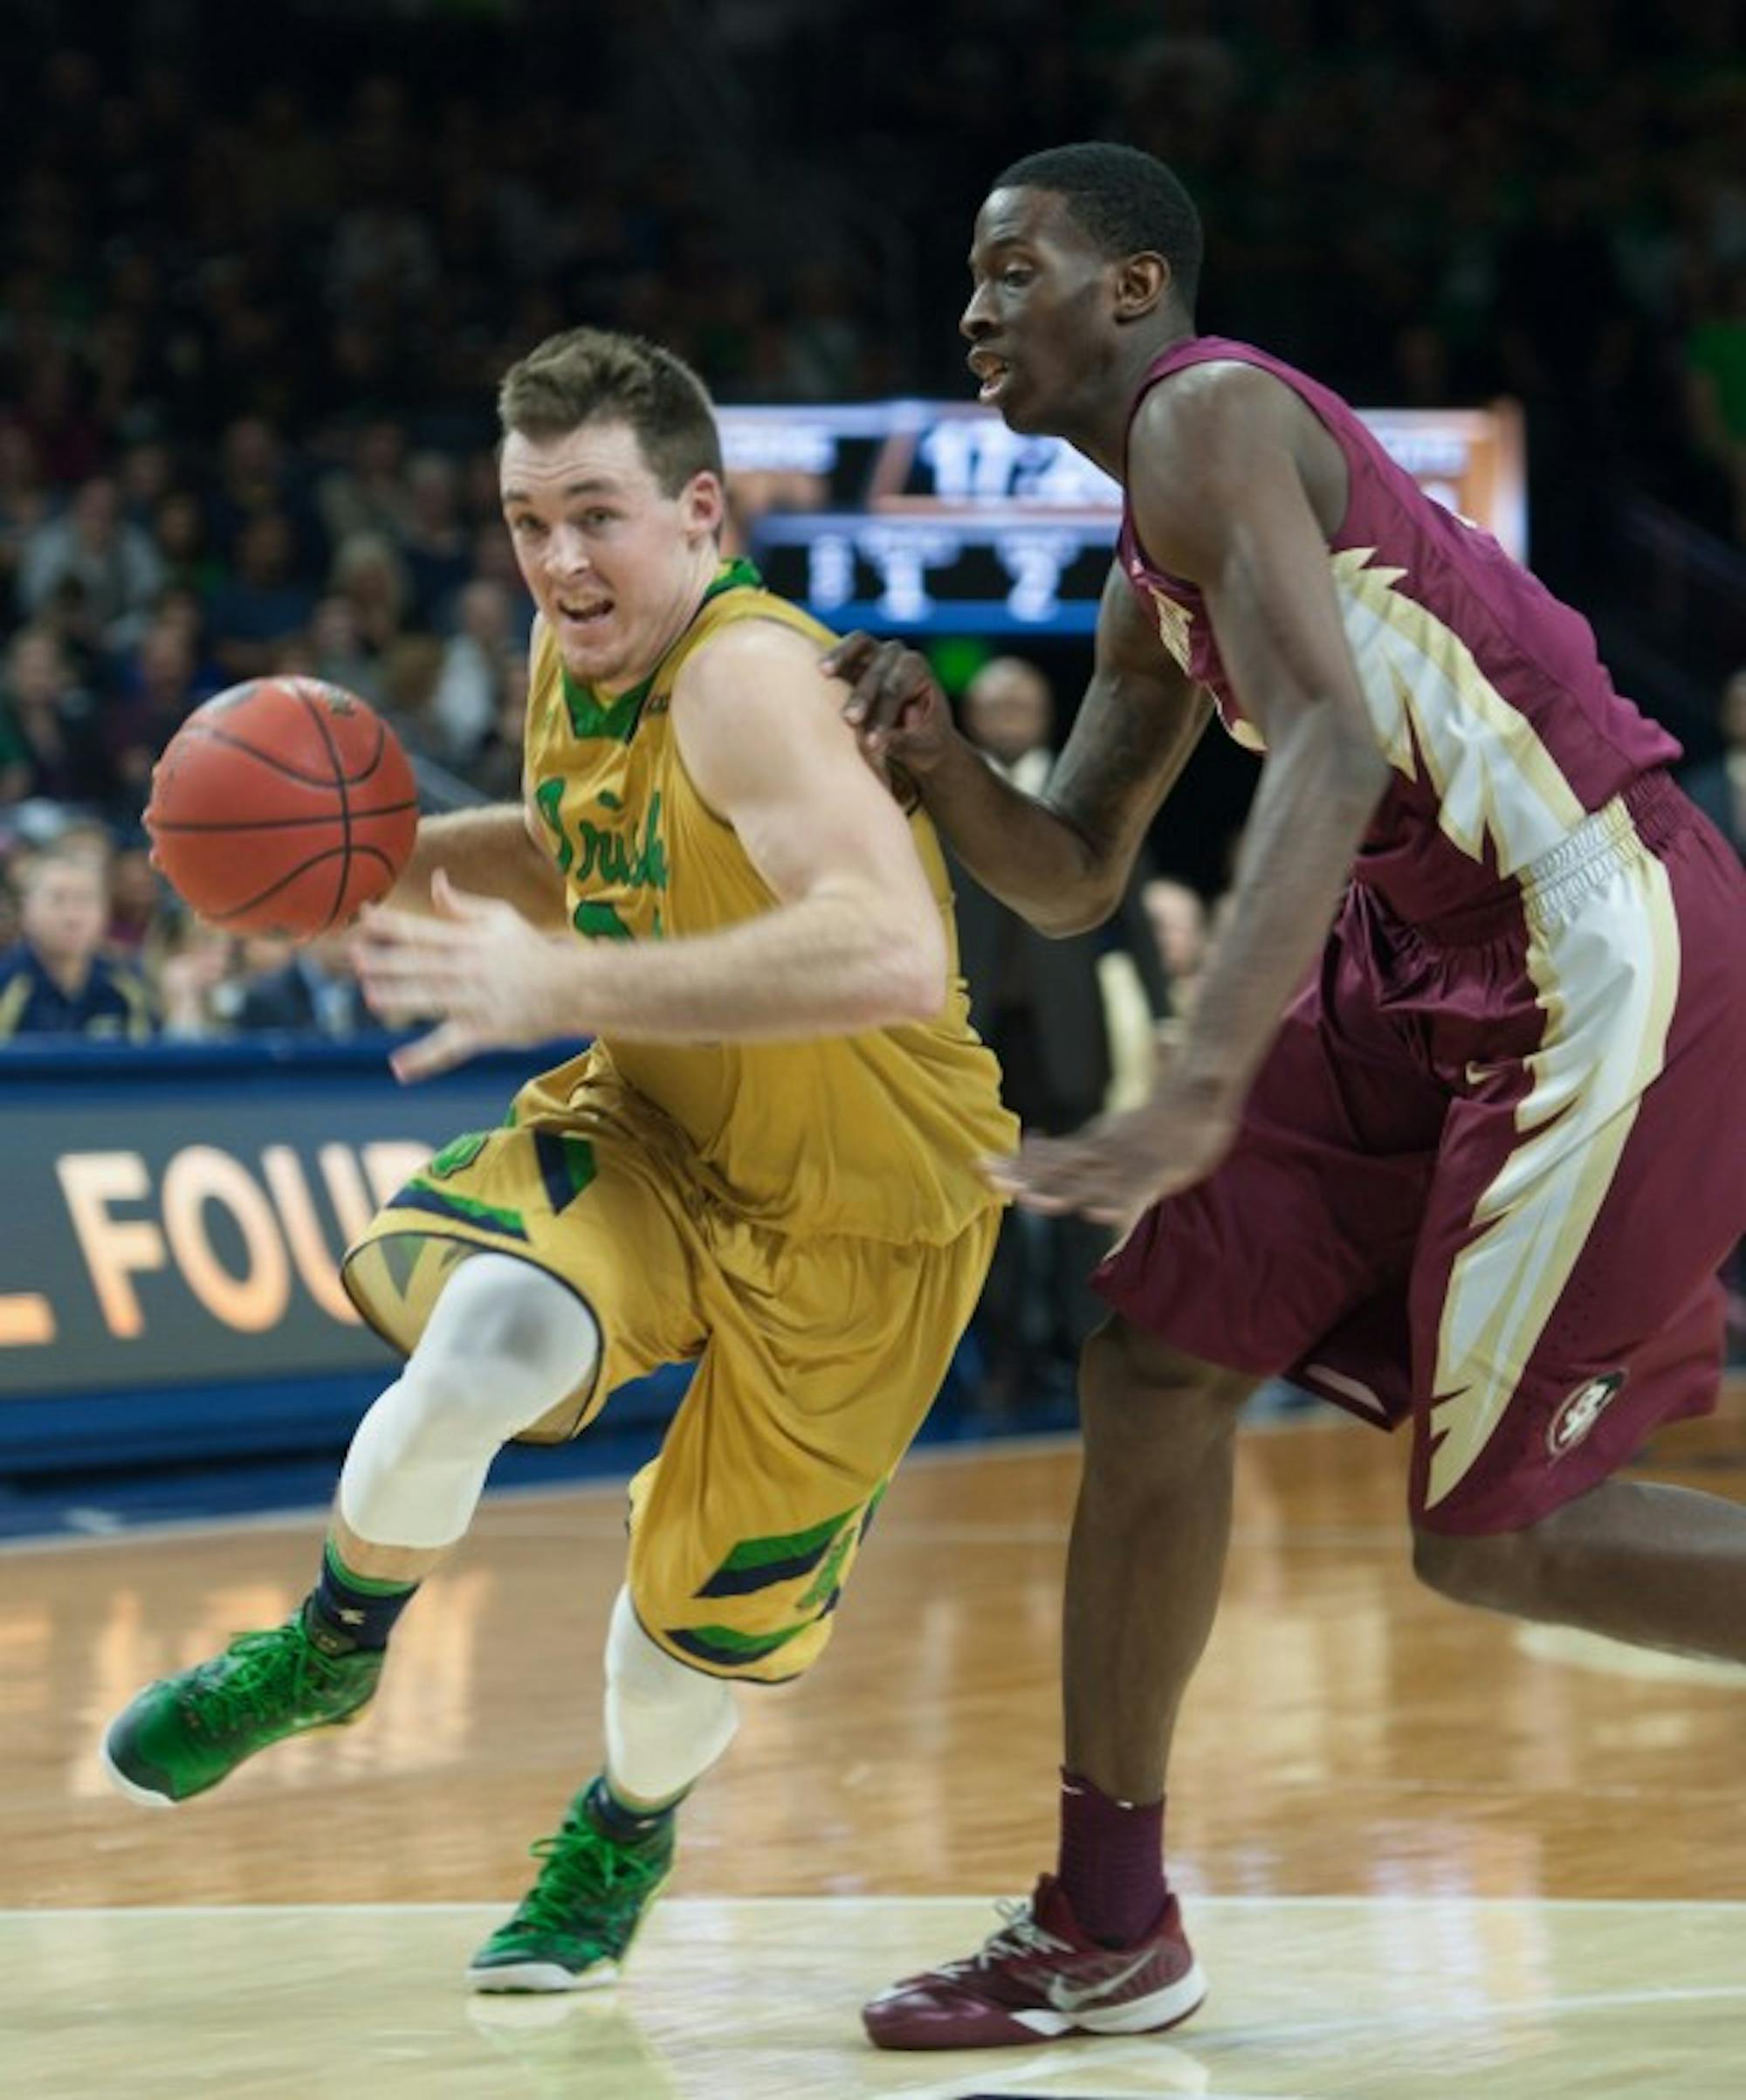 Irish senior guard Pat Connaughton drives into the lane against a Florida State defender in Notre Dame’s 83-63 win Dec. 13 at Purcell Pavilion.